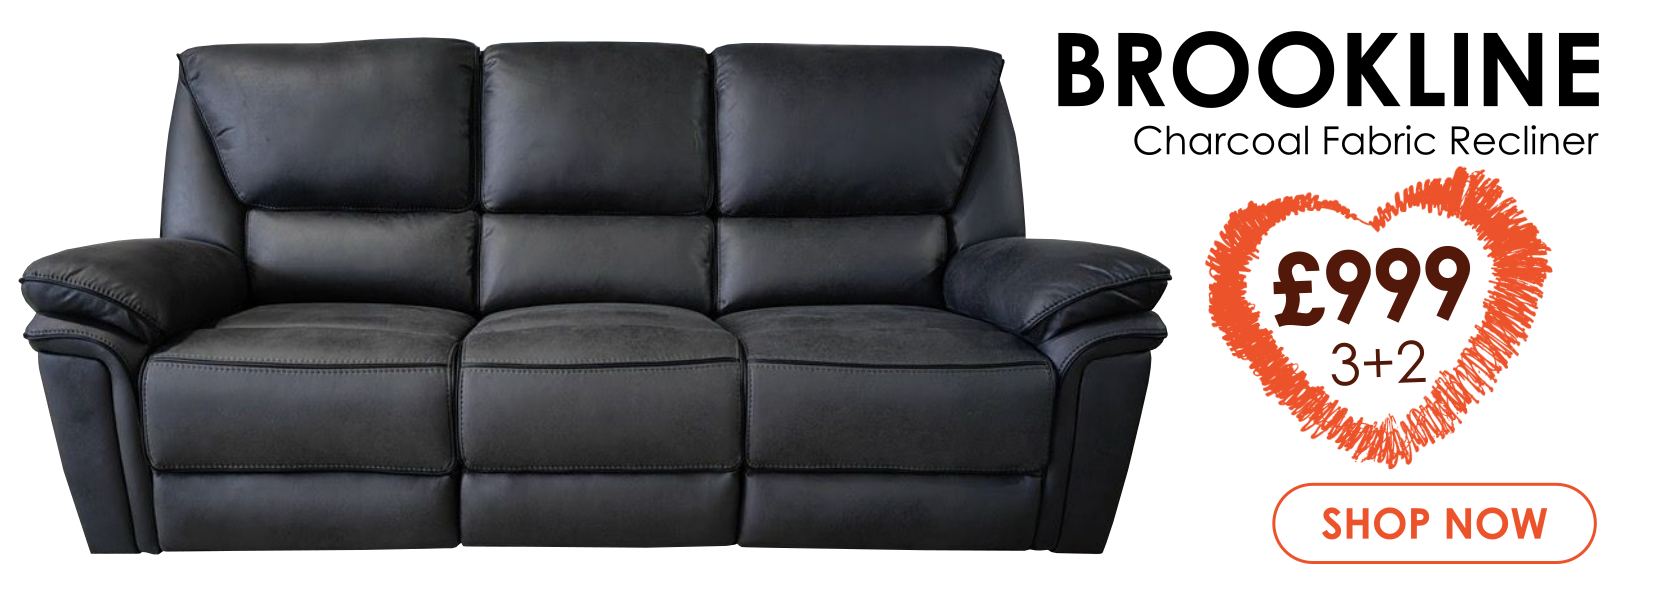 Brookline 3+2 recliner in Black Charcoal fabric finish